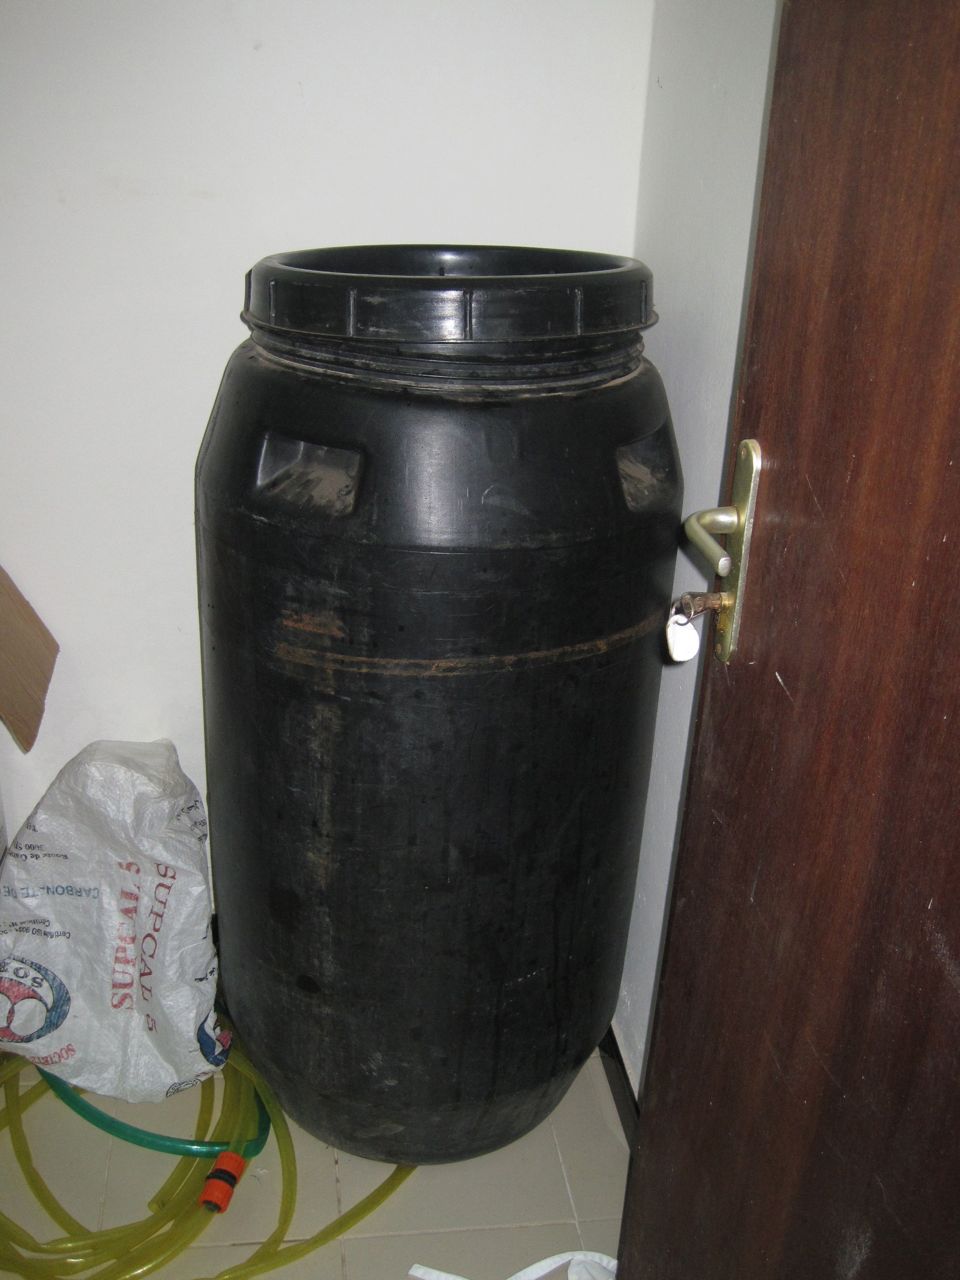 Why the Barrel in the pantry?